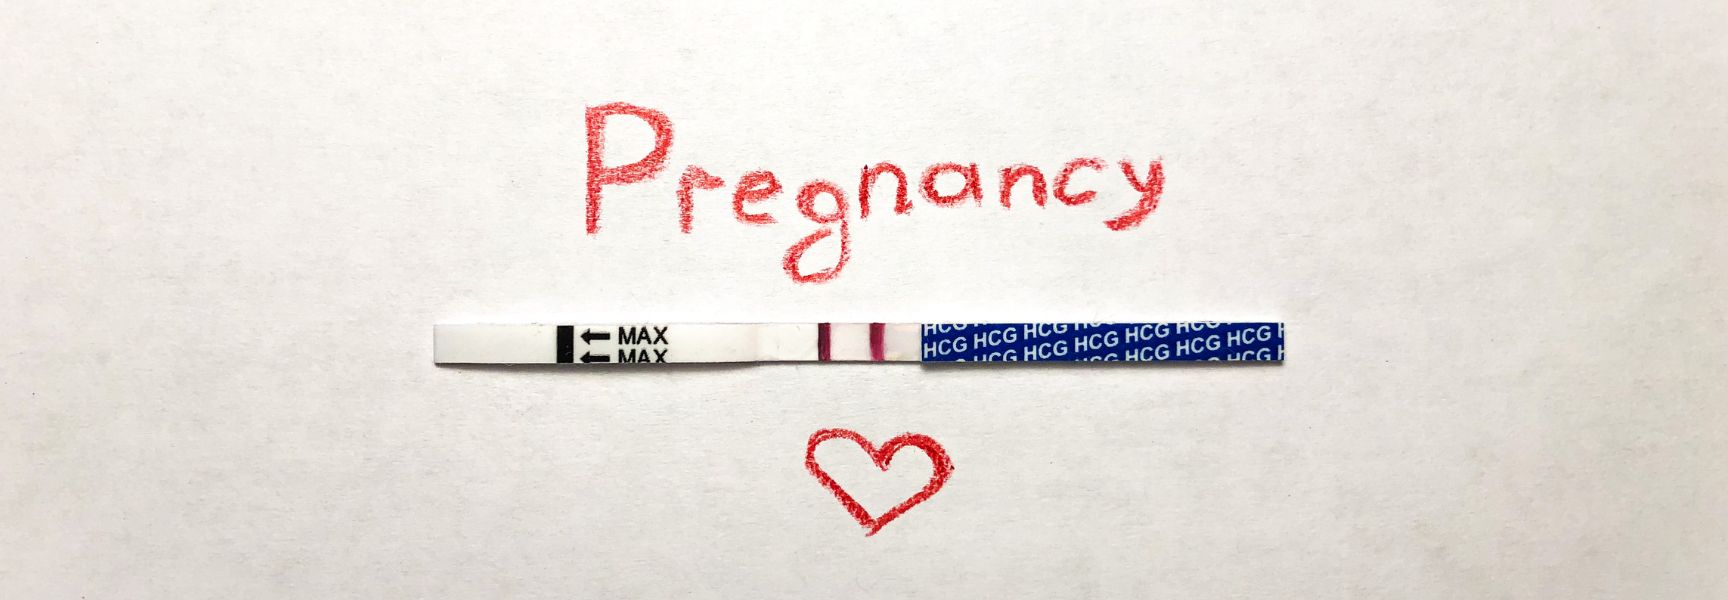 The word Pregnancy with an image of a pregnancy test strip